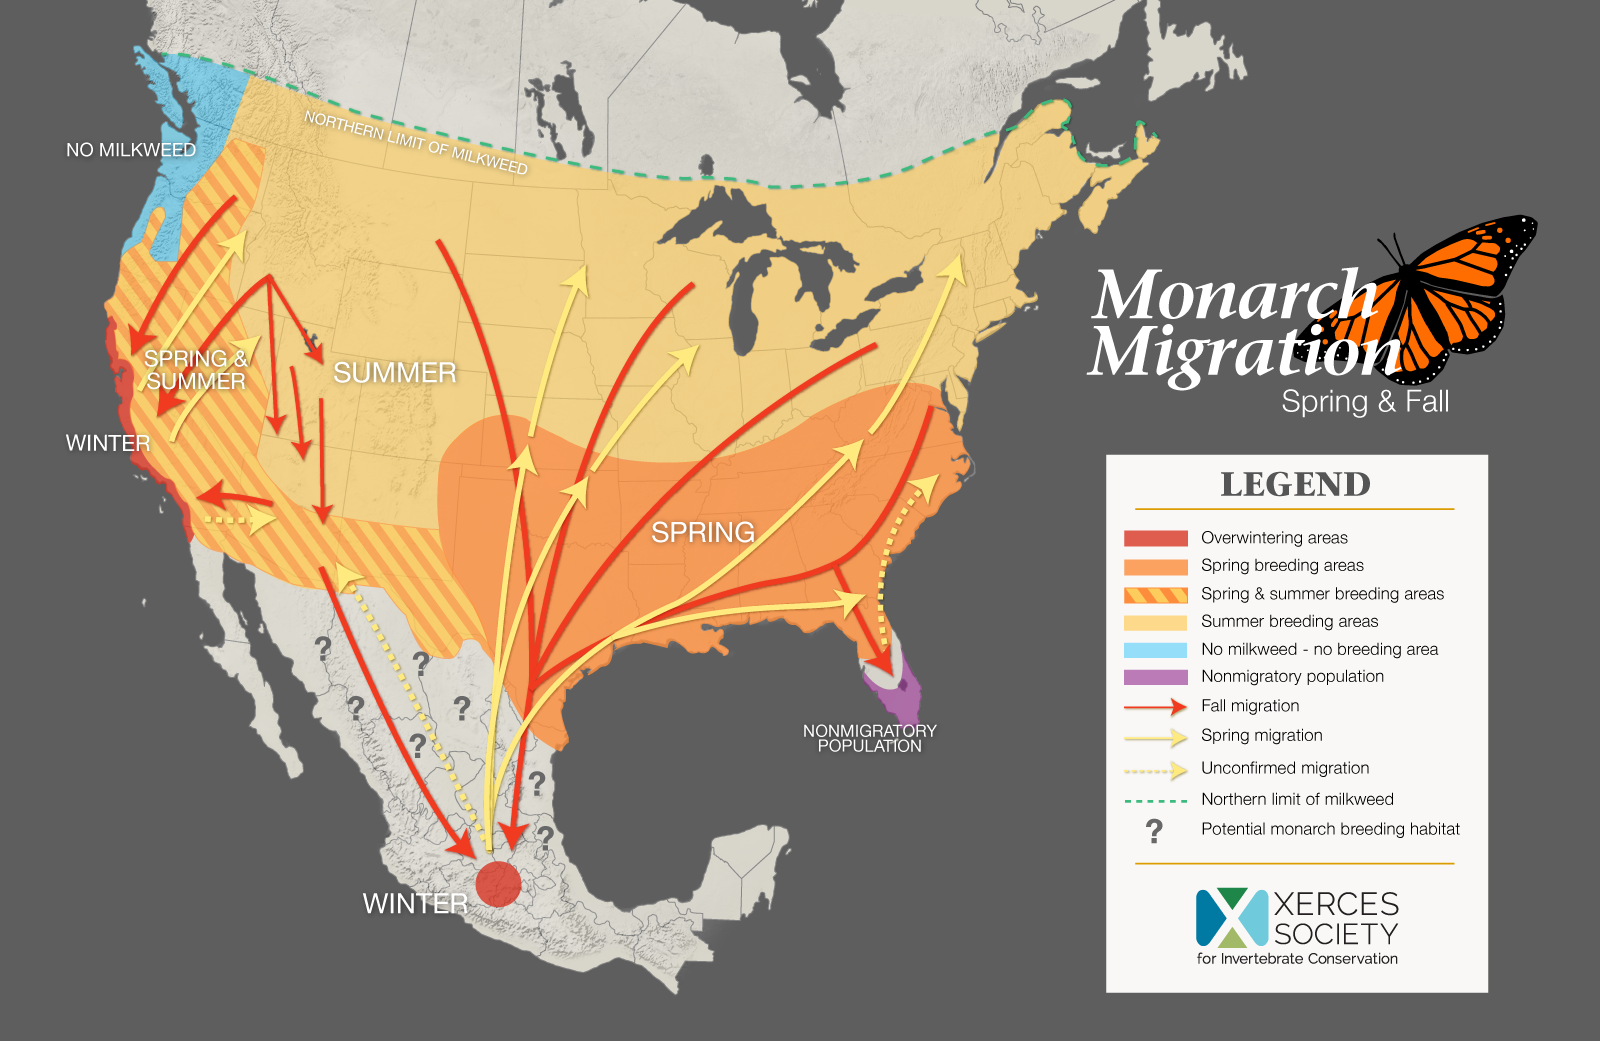 A map of North America shows the path of the eastern and western monarch migrations. The eastern migration journeys from southern Canada, east of the Rocky Mountains, to the oyamel fir forests of Mexico, and the western monarch migration journeys from the Pacific Northwest and inter-mountain west to the coast of California.